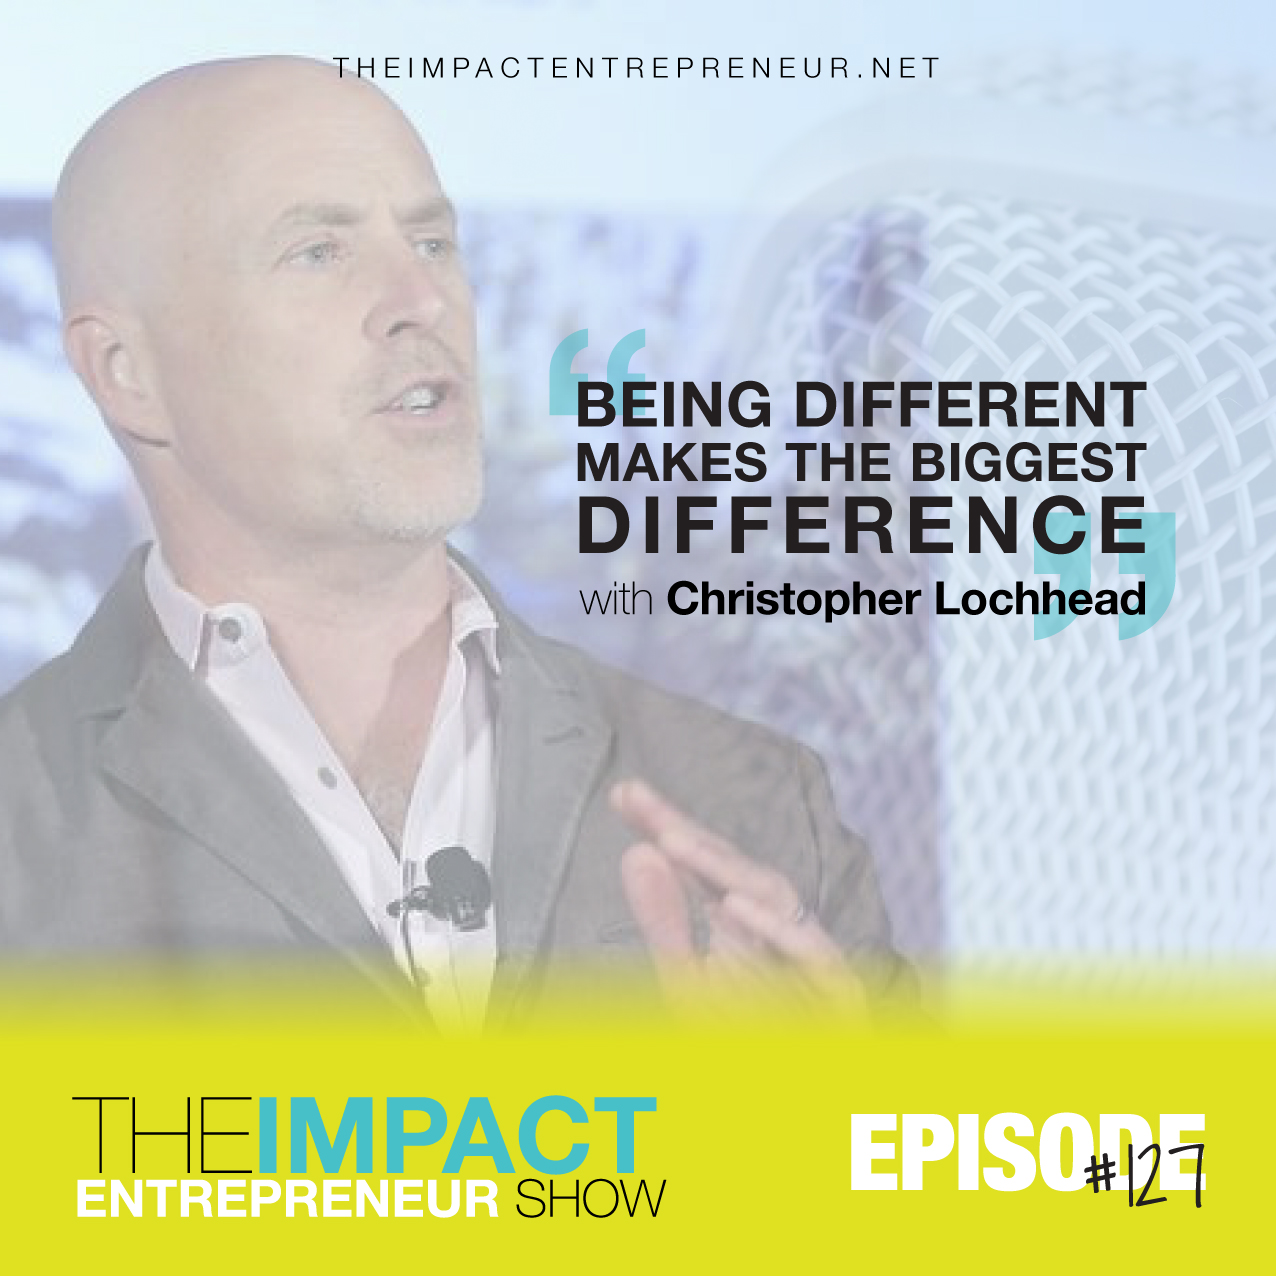 Ep. 127 - Being Different Makes the Biggest Difference - with Christopher Lochhead